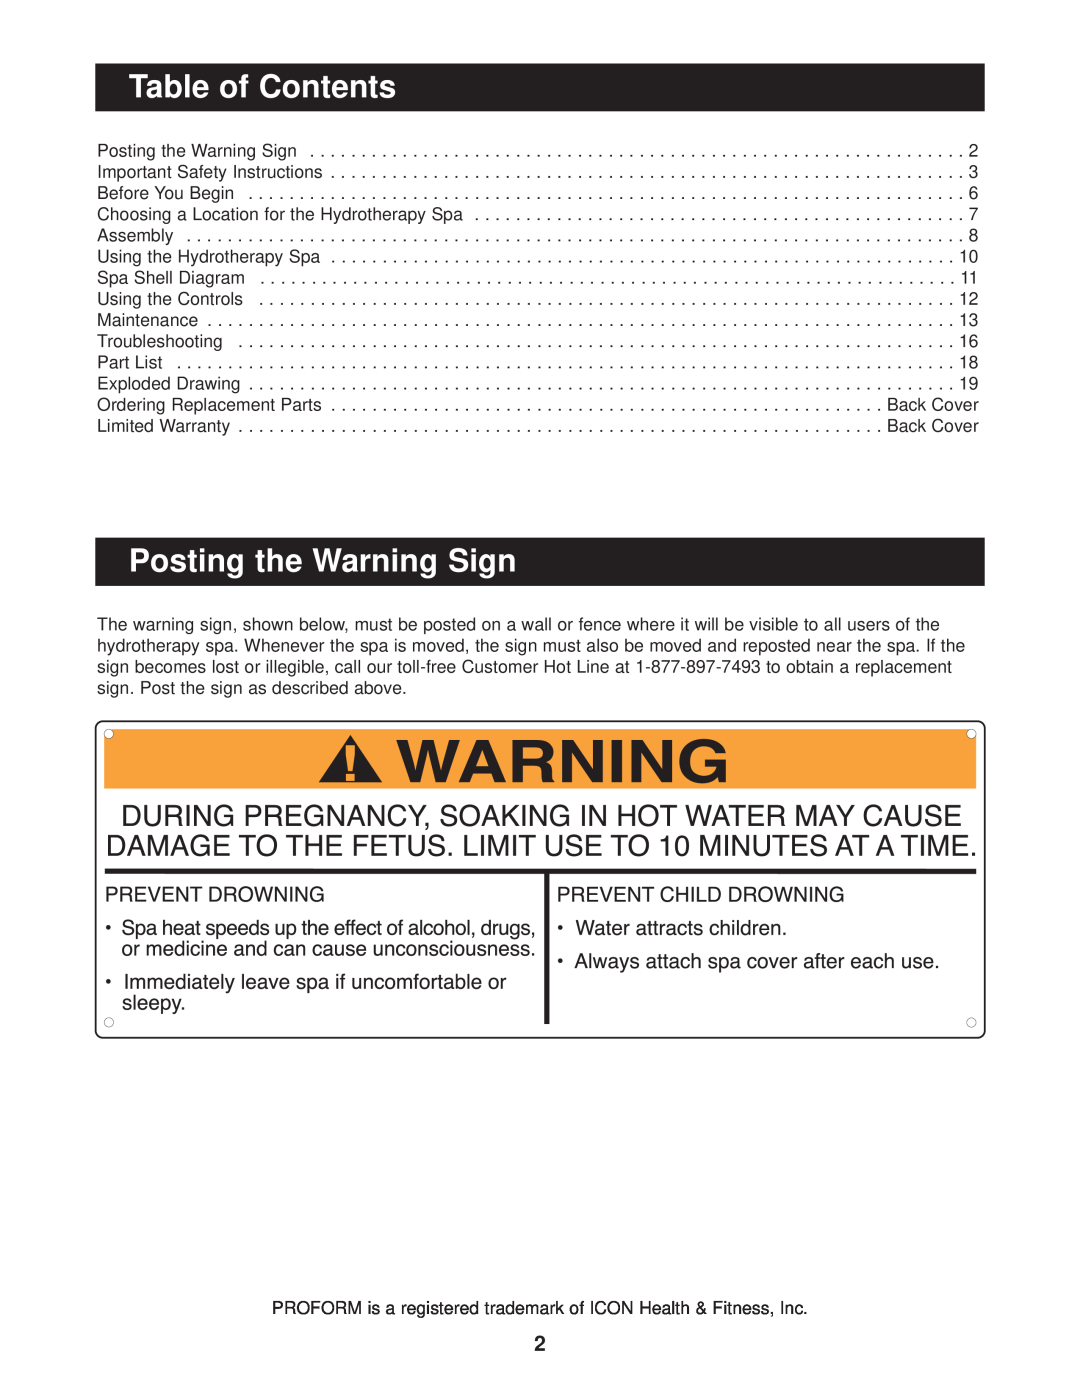 ProForm PFSB62830 user manual Table of Contents, Posting the Warning Sign 